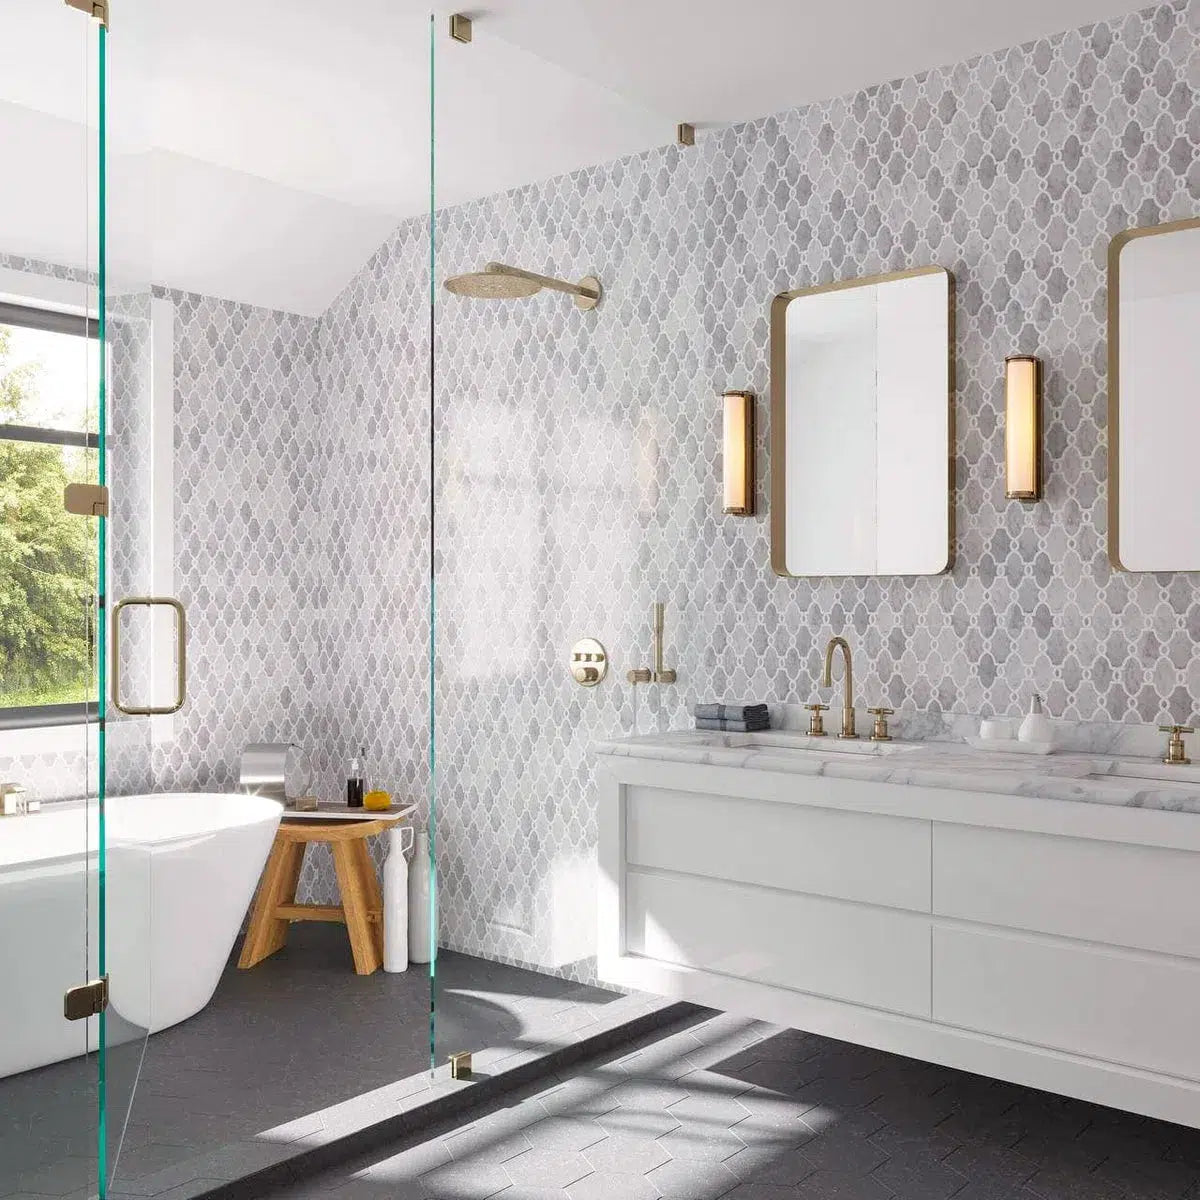 Modern open bathroom with Thassos White Chains Marble Mosaic Tile walls in in the vanity and wet room